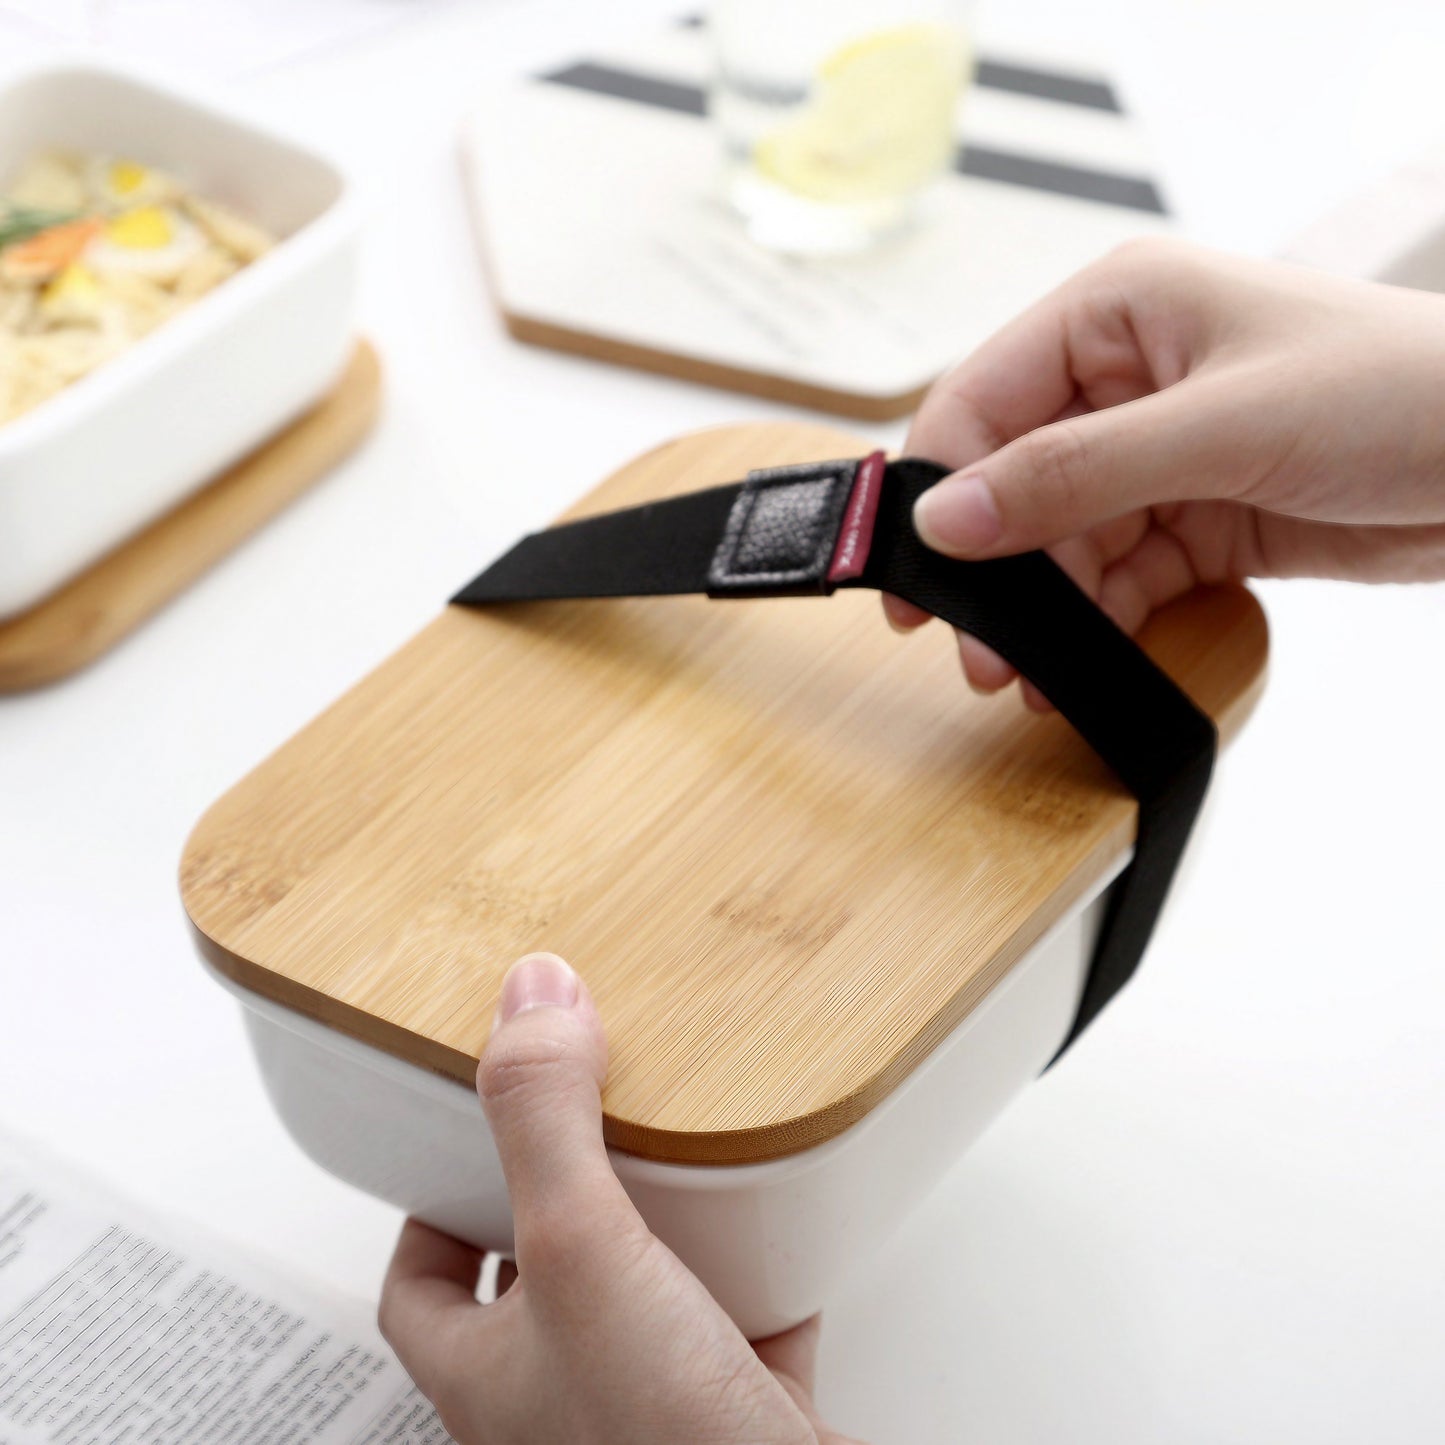 Hand holding a ceramic bento box with a wooden lid and black strap